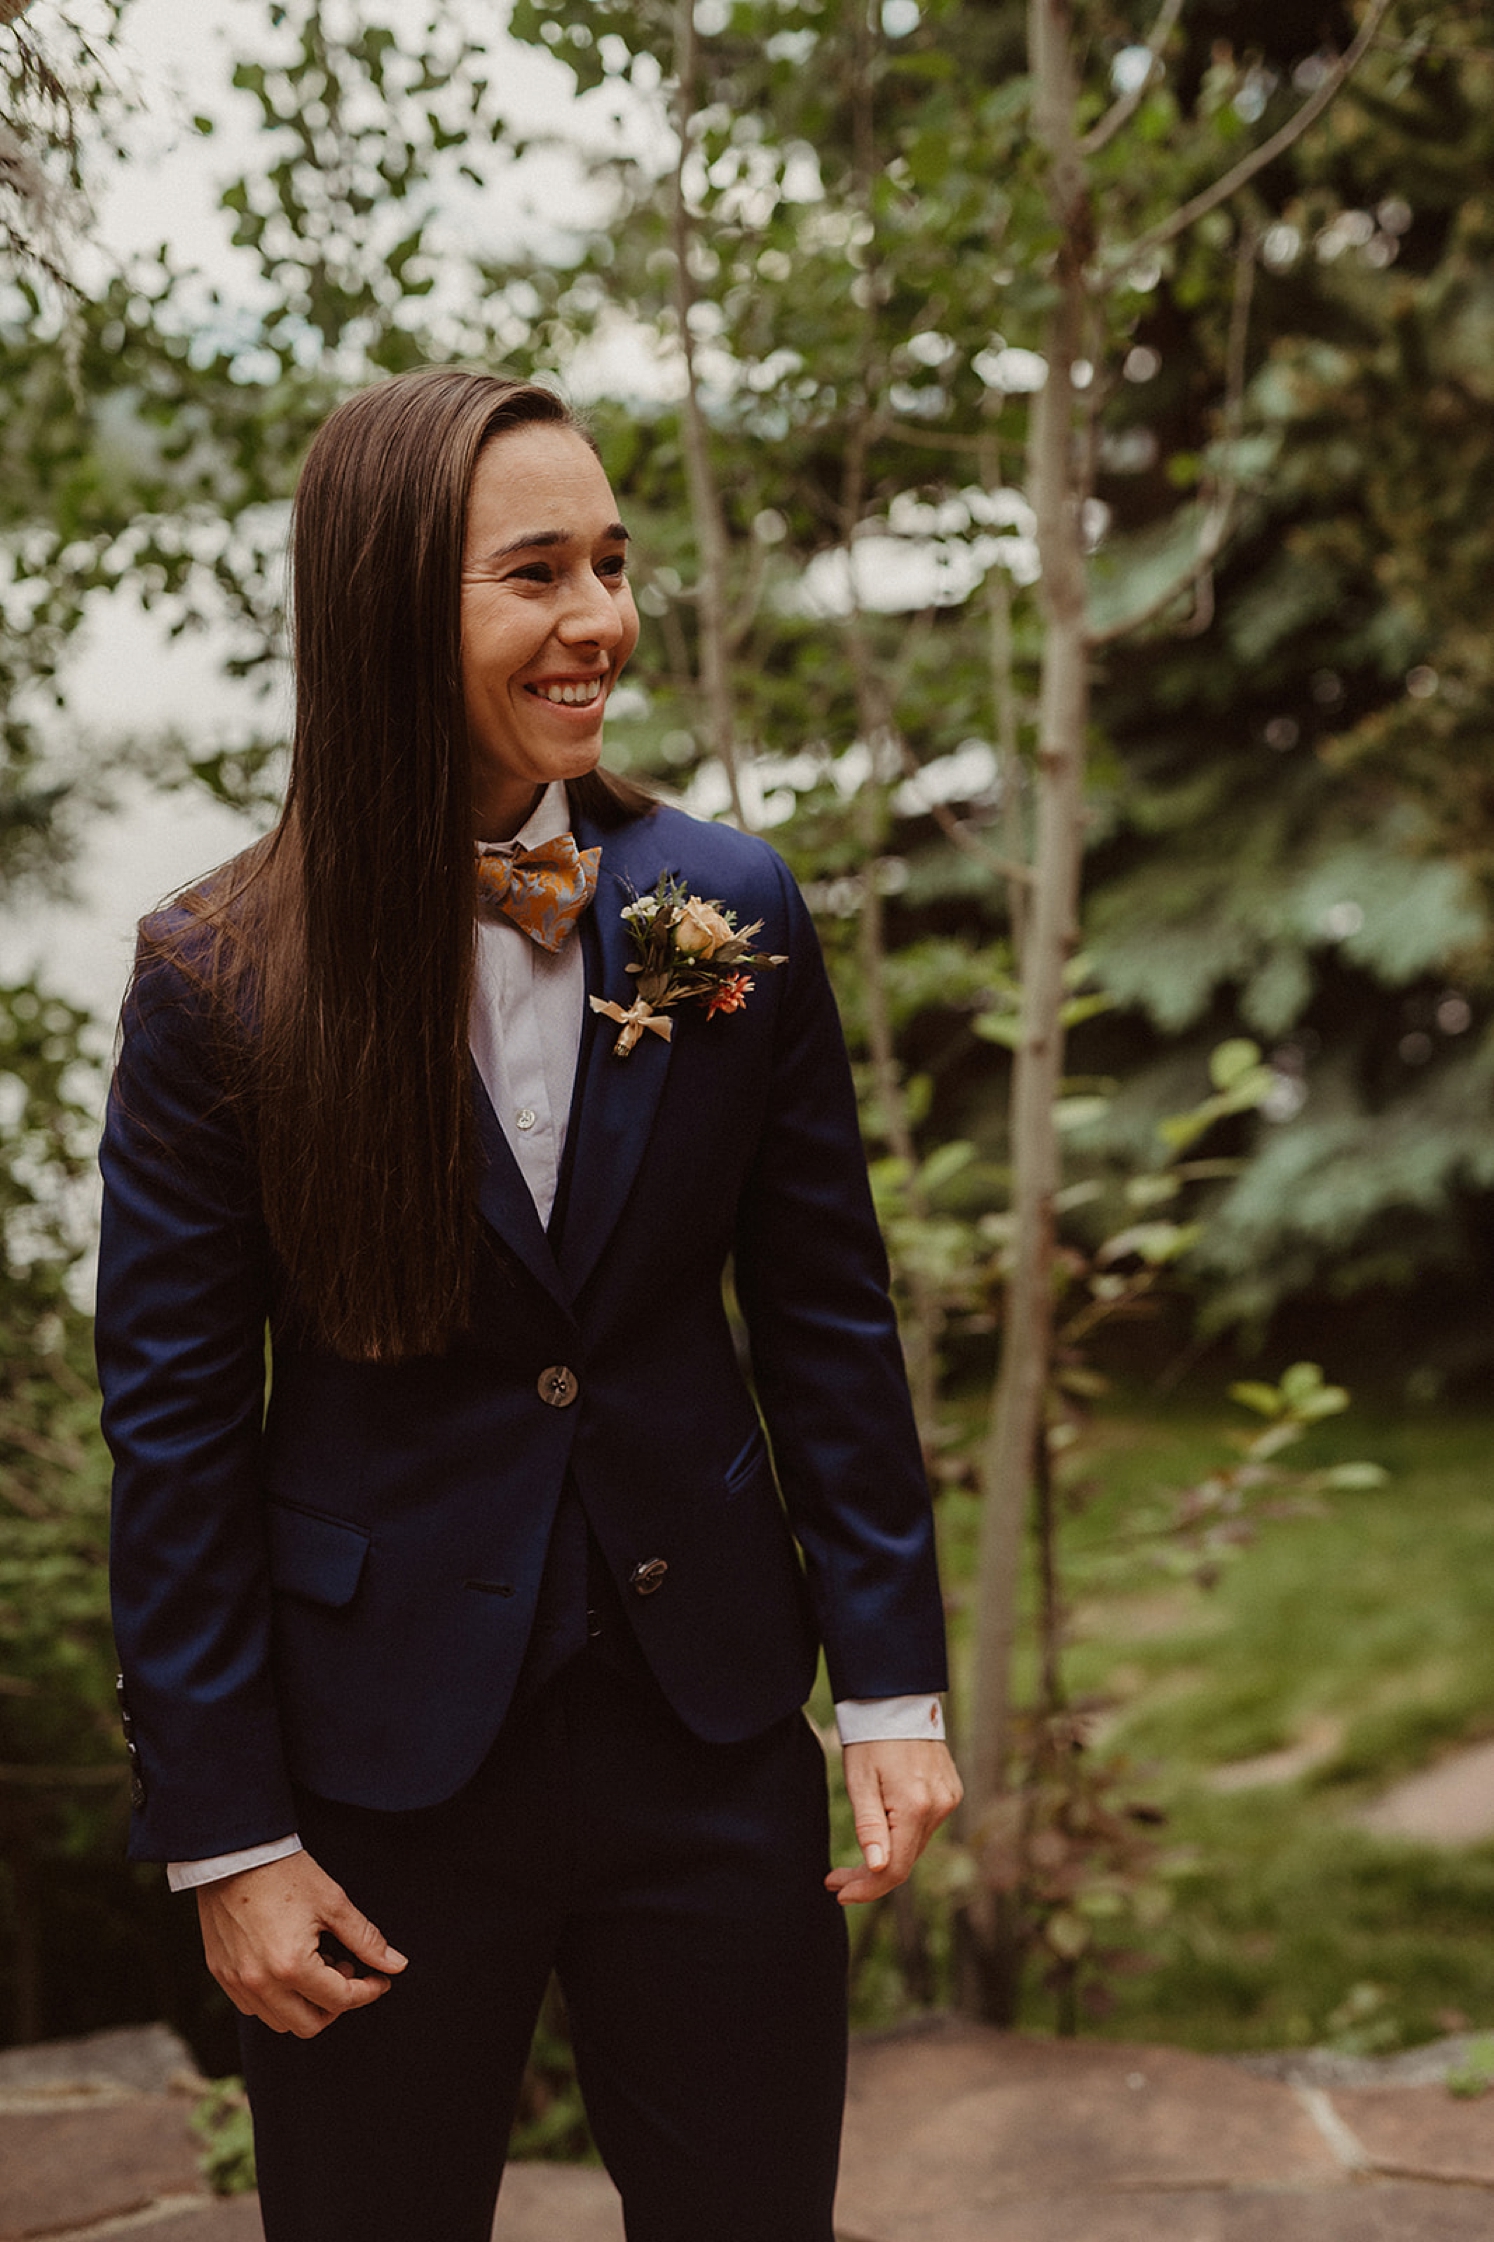 Partner watching partner walk down the aisle at Colorado Airbnb wedding | McArthur Weddings and Events